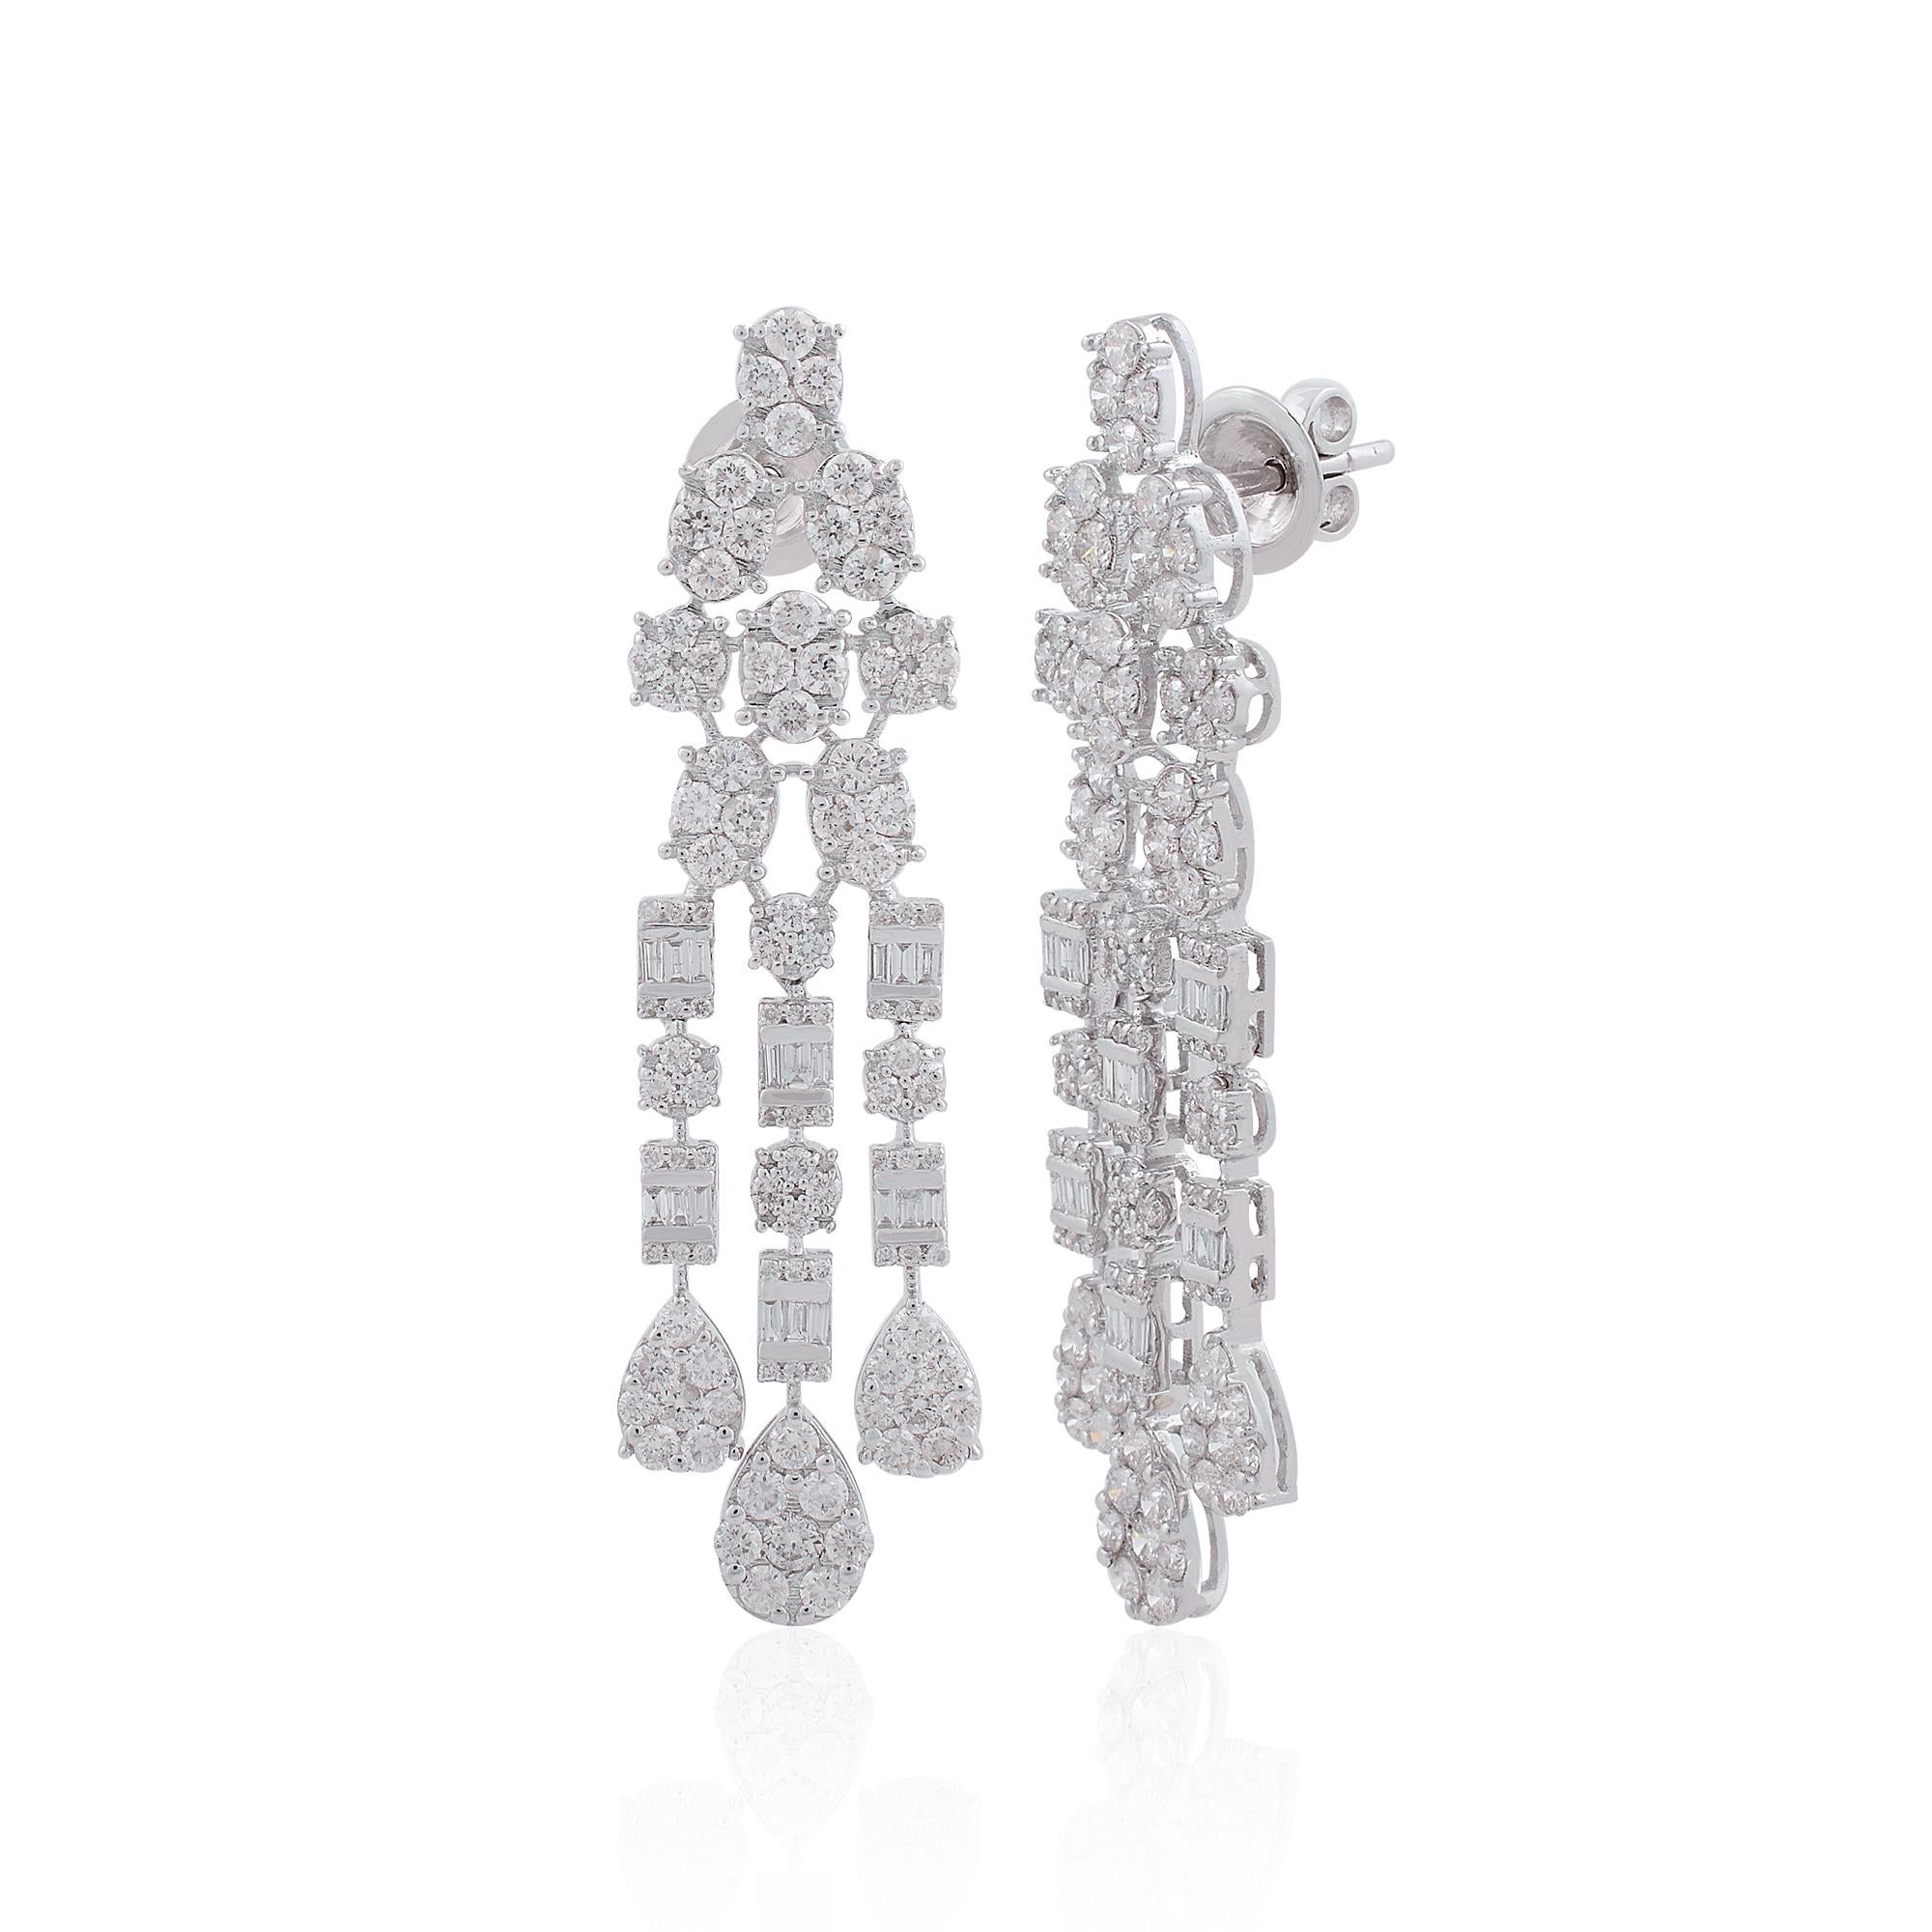 Item Code :- SEE-1592
Gross Weight :- 12.59 gm
18k White Gold Weight :- 11.84 gm
Diamond Weight :- 3.75 Carat  ( AVERAGE DIAMOND CLARITY SI1-SI2 & COLOR H-I )
Earrings Length :- 48 mm approx.
✦ Sizing
.....................
We can adjust most items